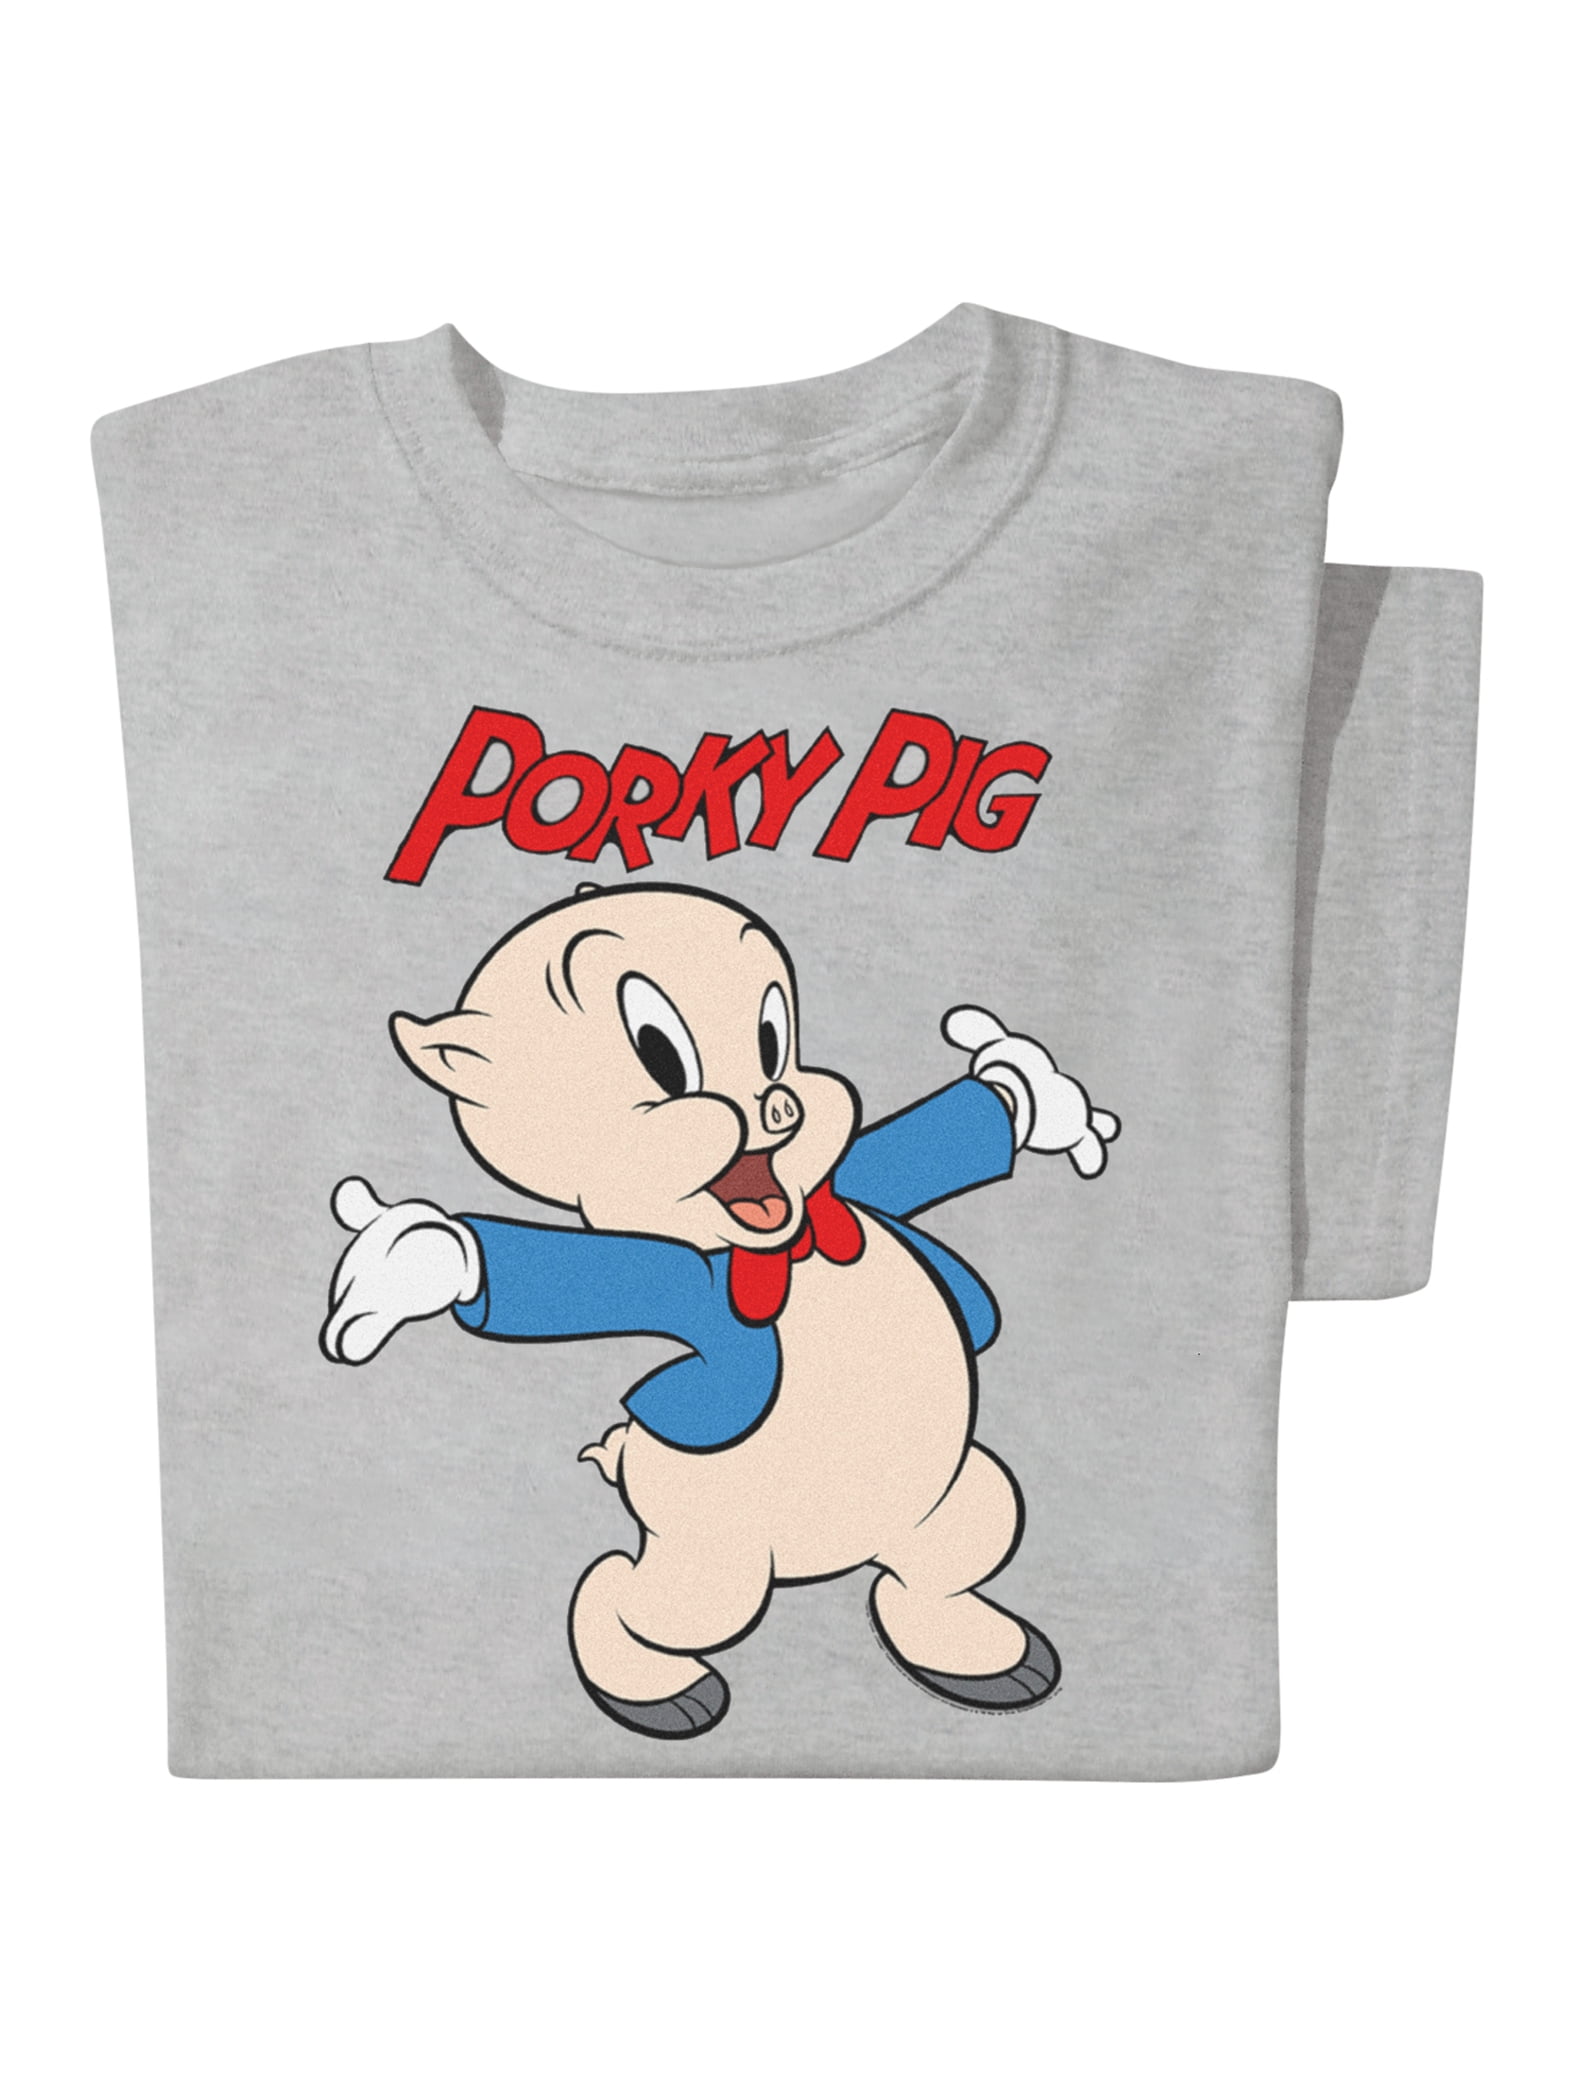 George Pig Message in a Bottle Short Sleeve T Shirt 